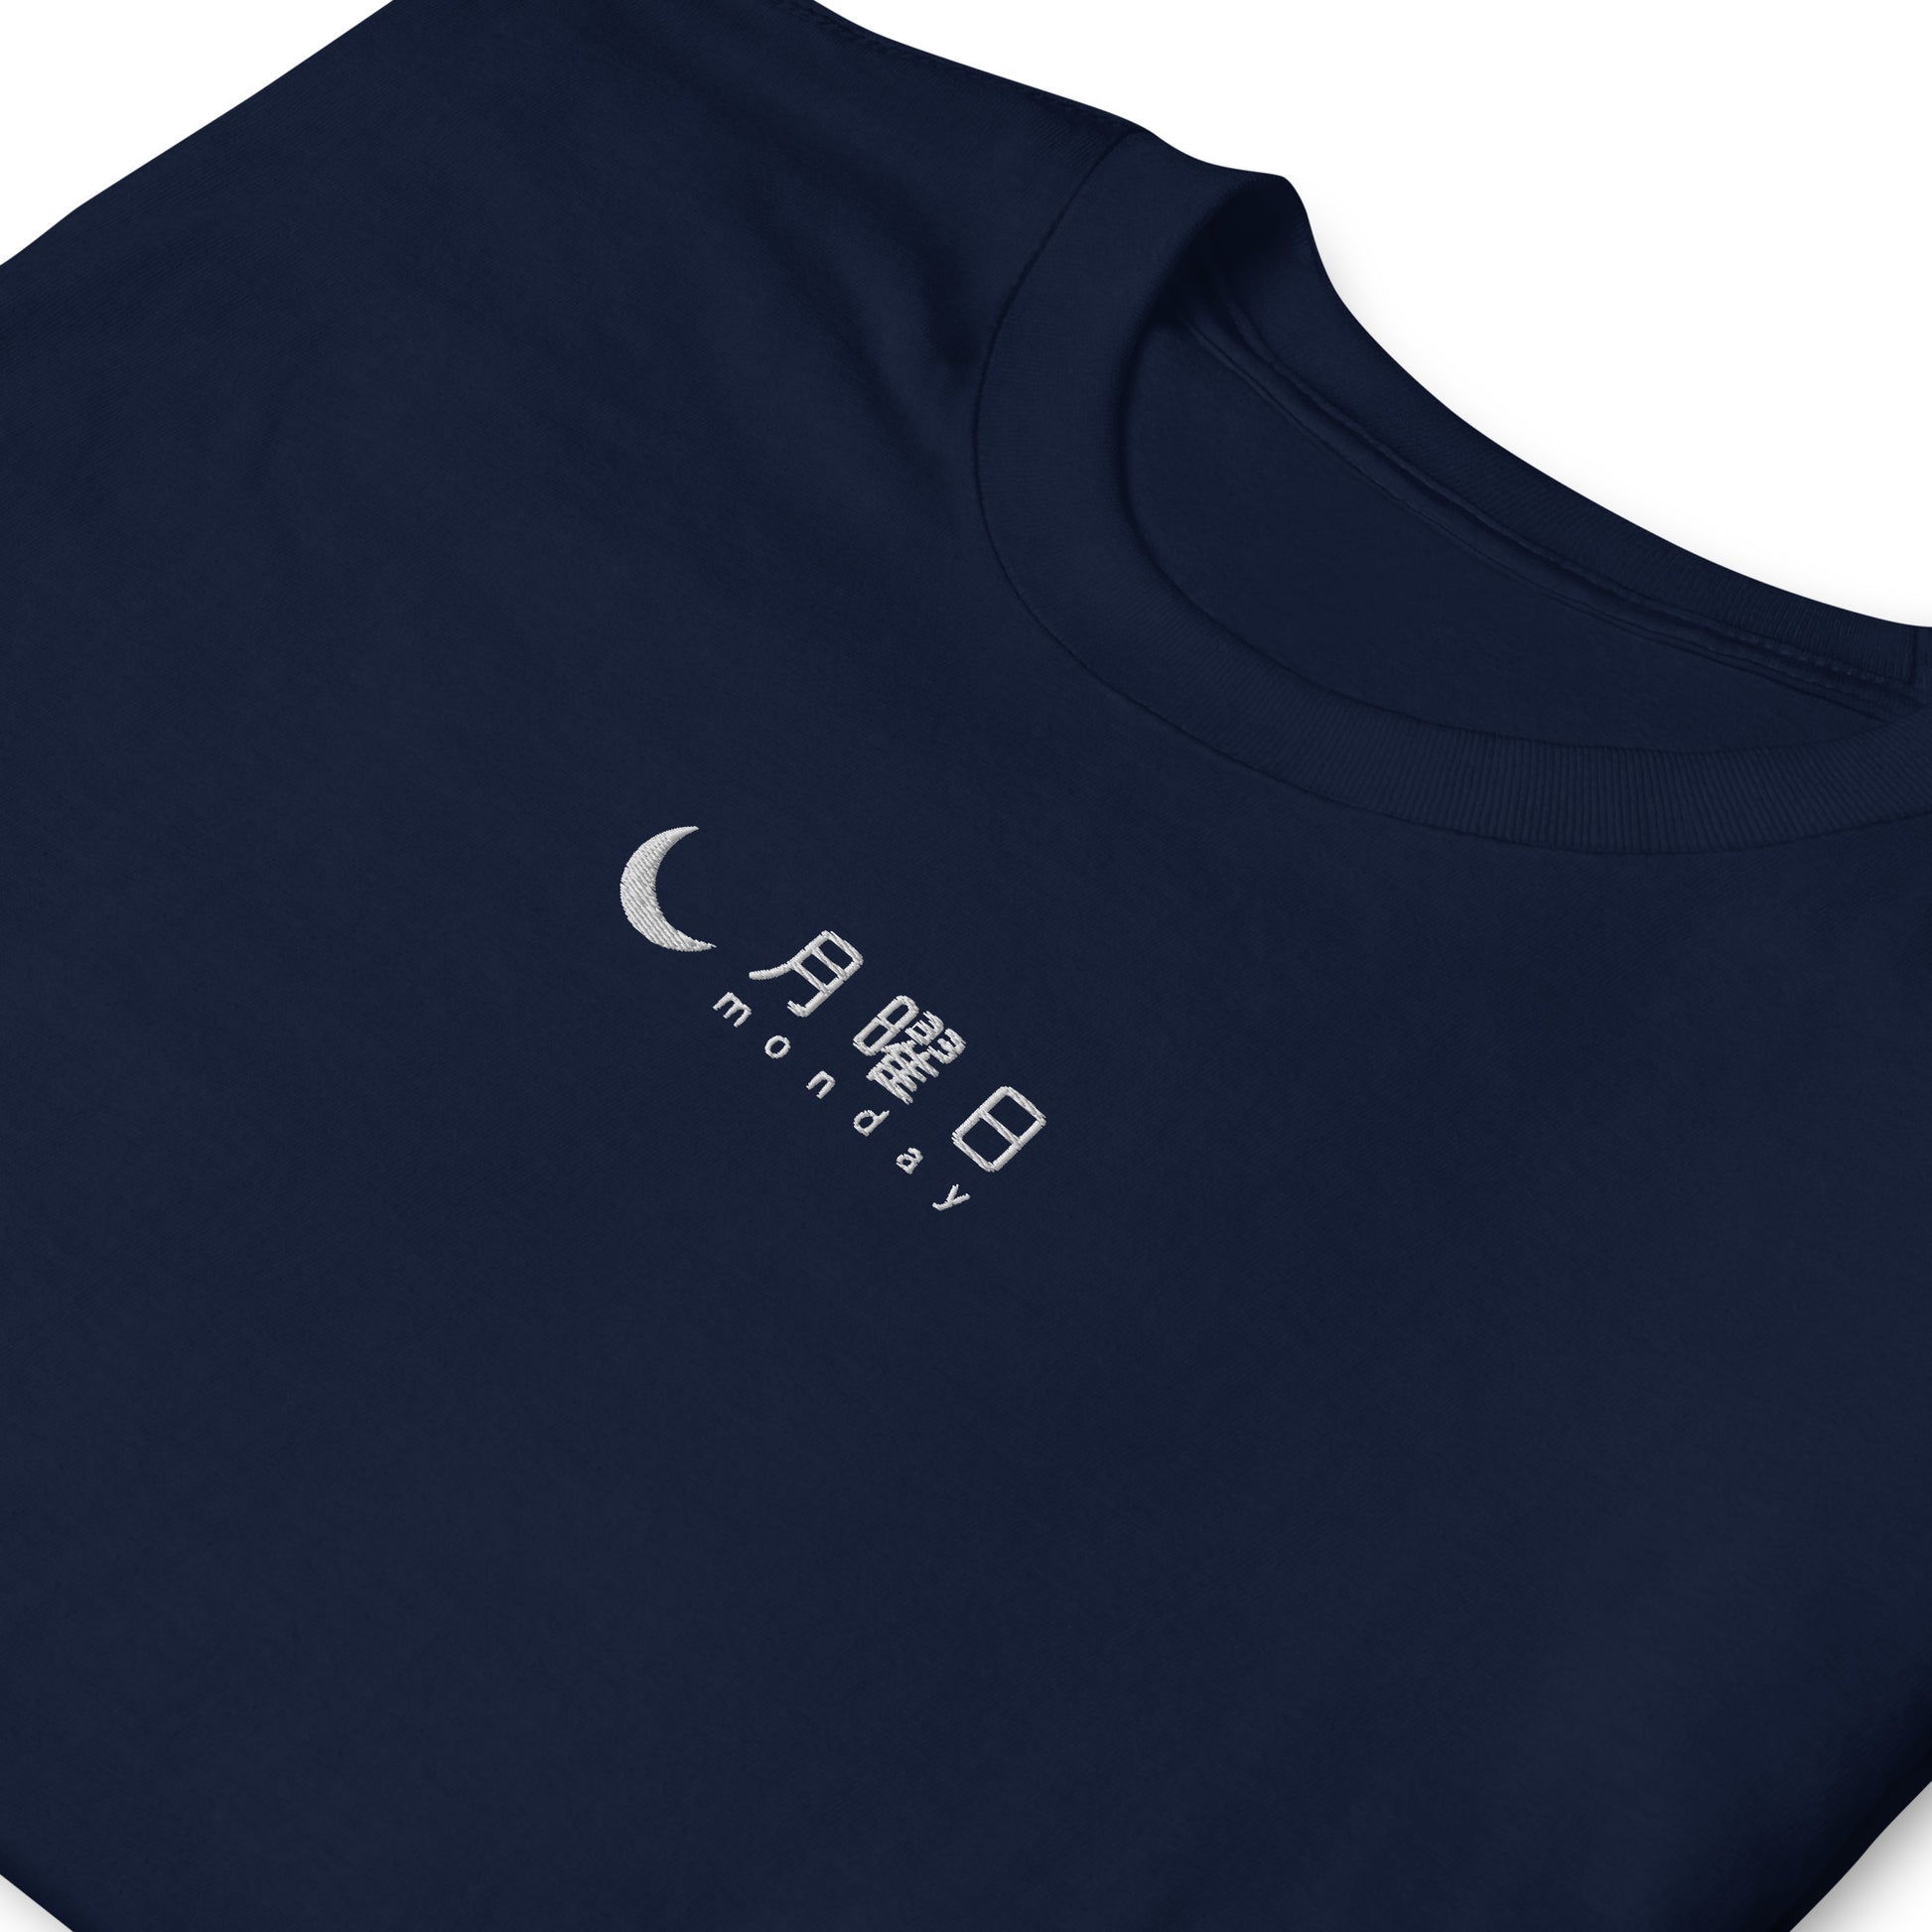 Navy High Quality Tee - Front Design with an Black "Monday" in Japanese and English